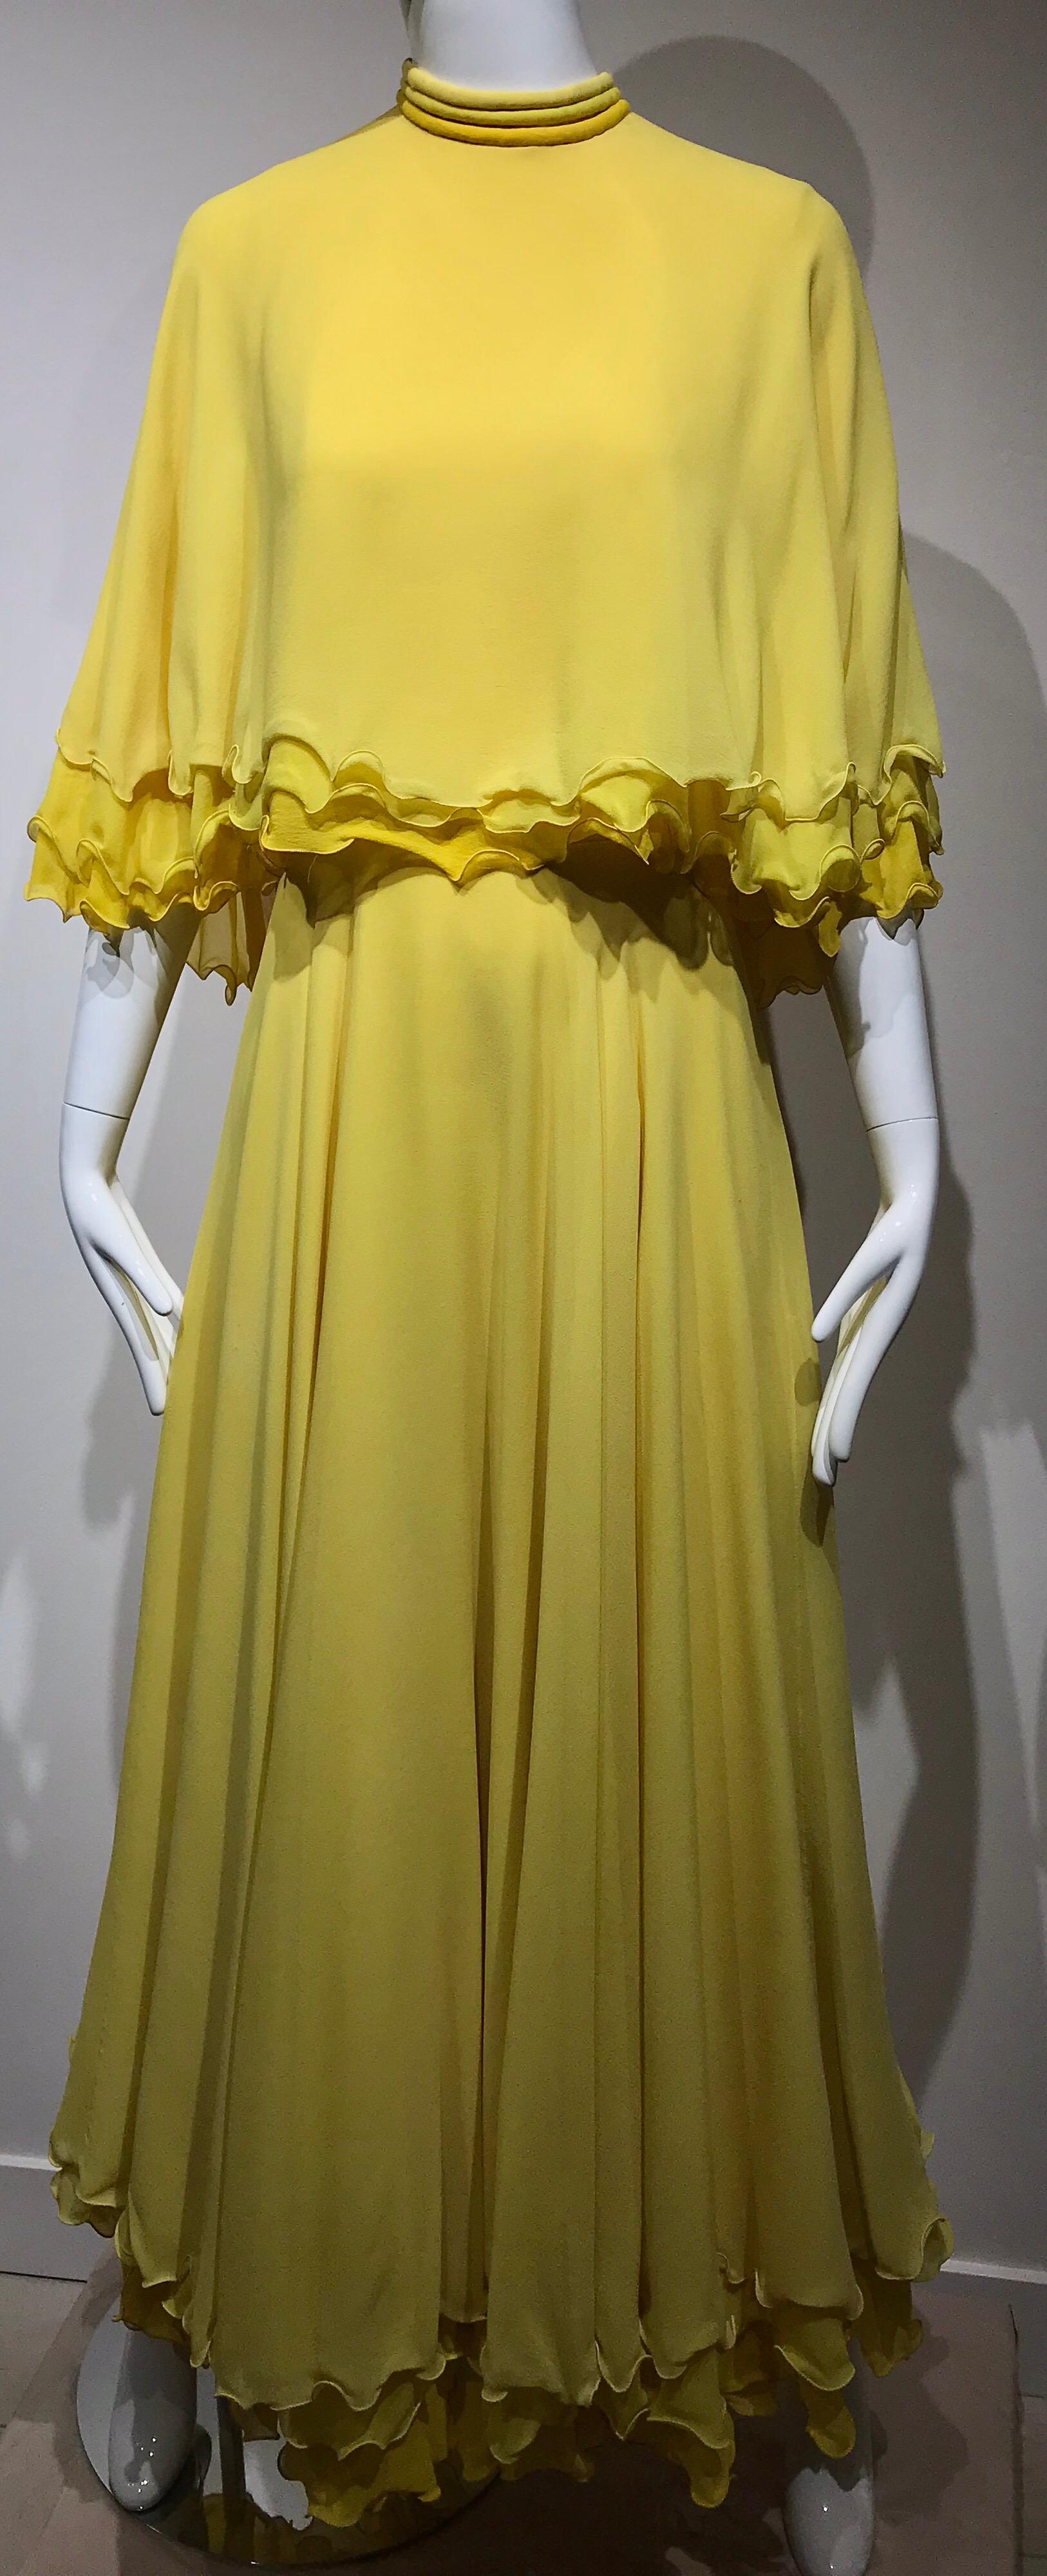 Beautiful 1970s La Mendola - Italy 3 layers silk chiffon yellow dress. 
Size: small ( fit 0/2/4 ) US size
Measurement: 
Bust: 34 inches/ Waist 25 inches/ Dress length : 53 inches
Dress has been professionally dry cleaned but there is still small